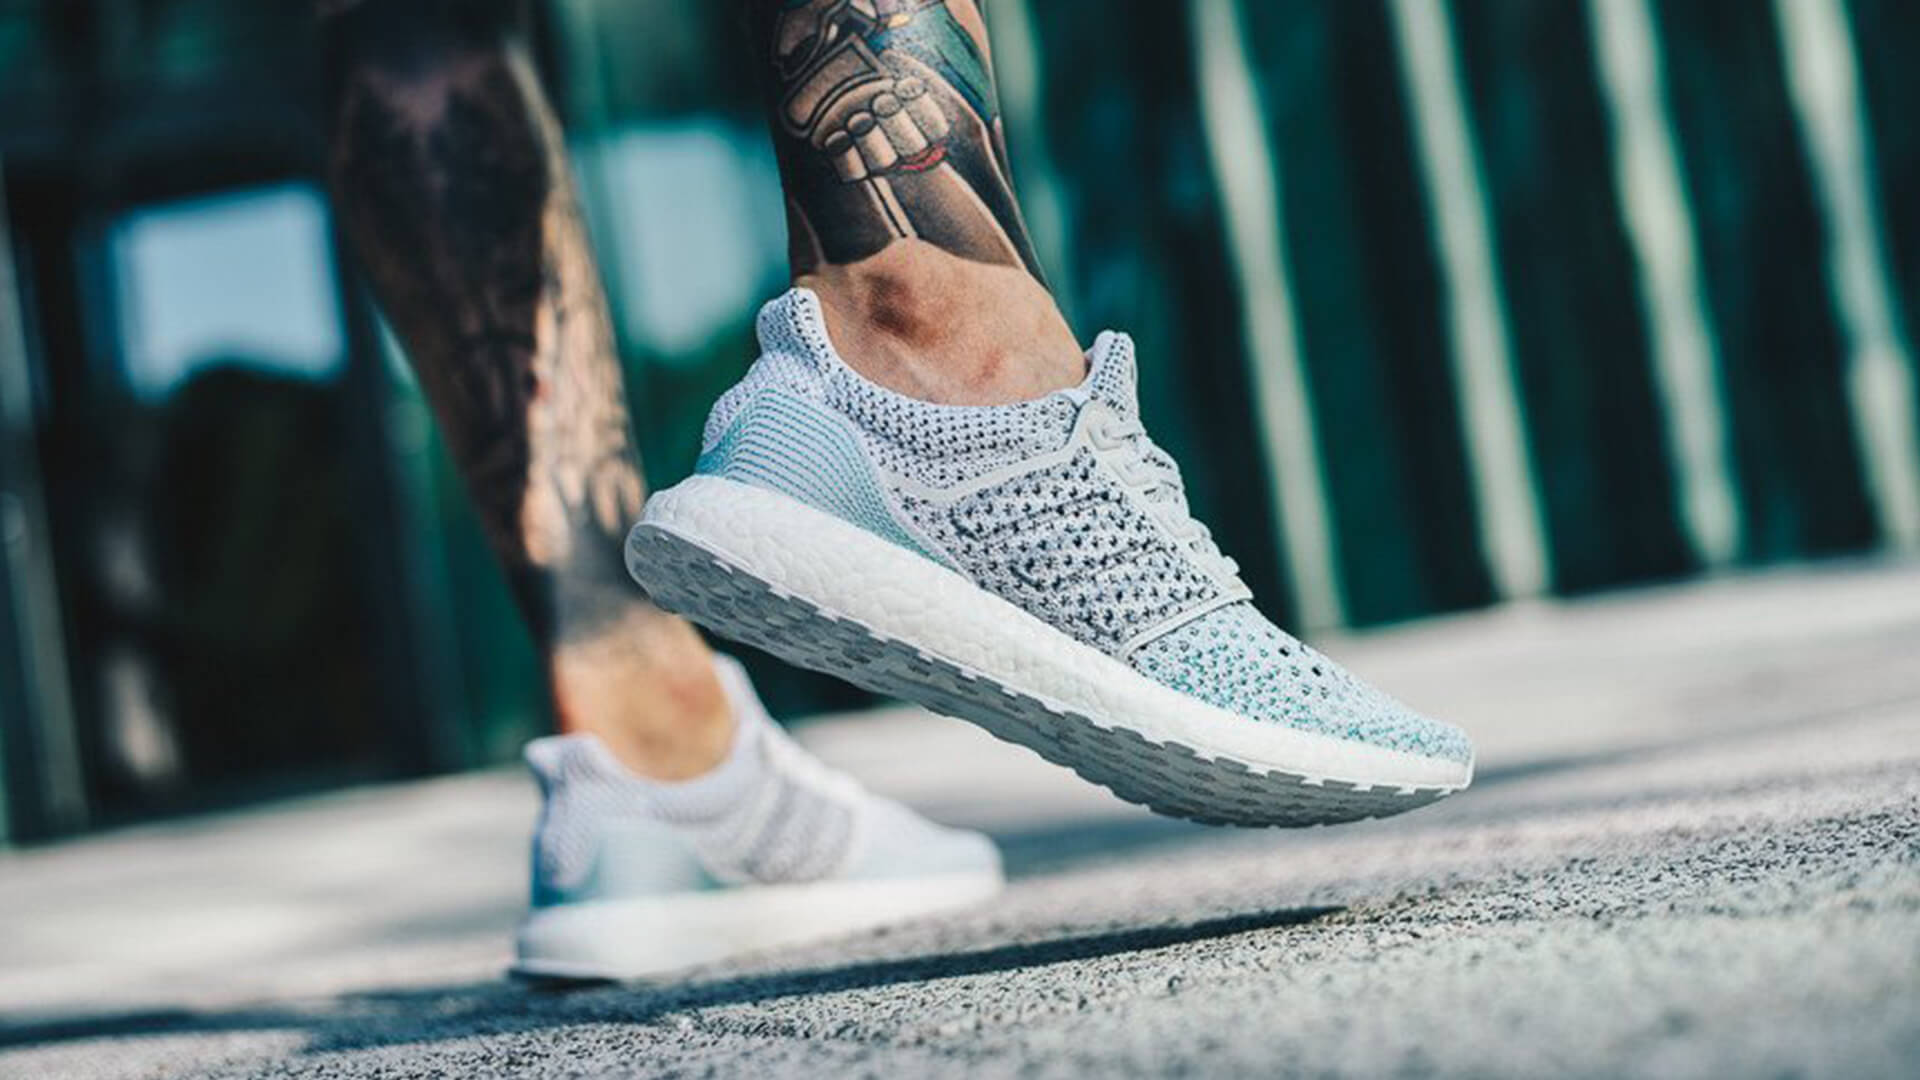 UltraBOOST 22: The Ultimate Sneaker for Your Sexiest Looks